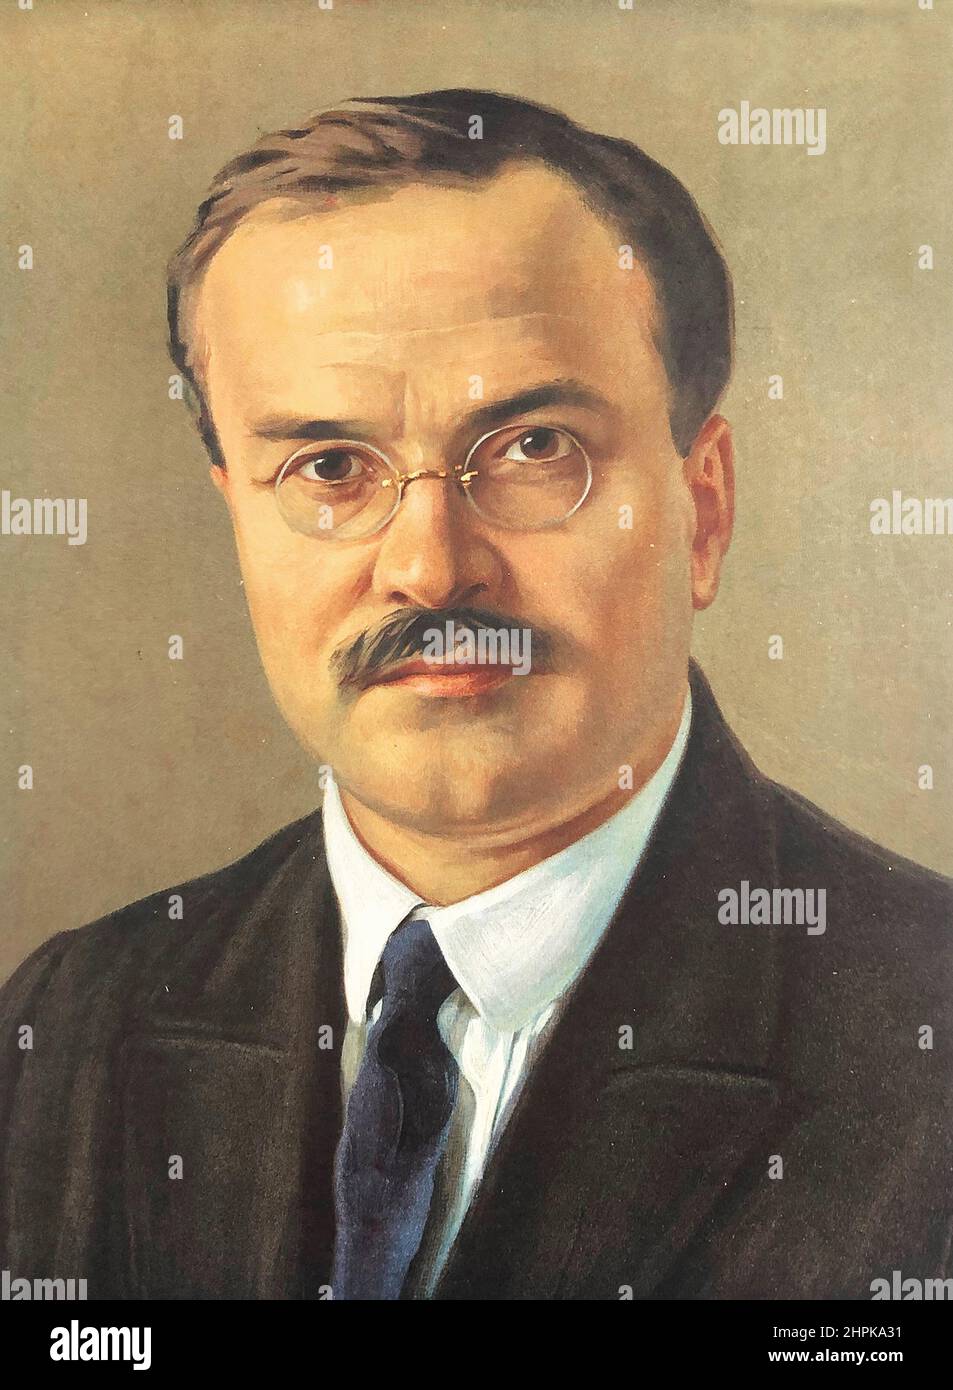 Portrait of Vyacheslav Molotov (1890–1986). He was a Russian politician and diplomat, an Old Bolshevik, and a leading figure in the Soviet government from the 1920s onward. He served as Chairman of the Council of People's Commissars from 1930 to 1941 and as Minister of Foreign Affairs from 1939 to 1949 and from 1953 to 1956. Stock Photo